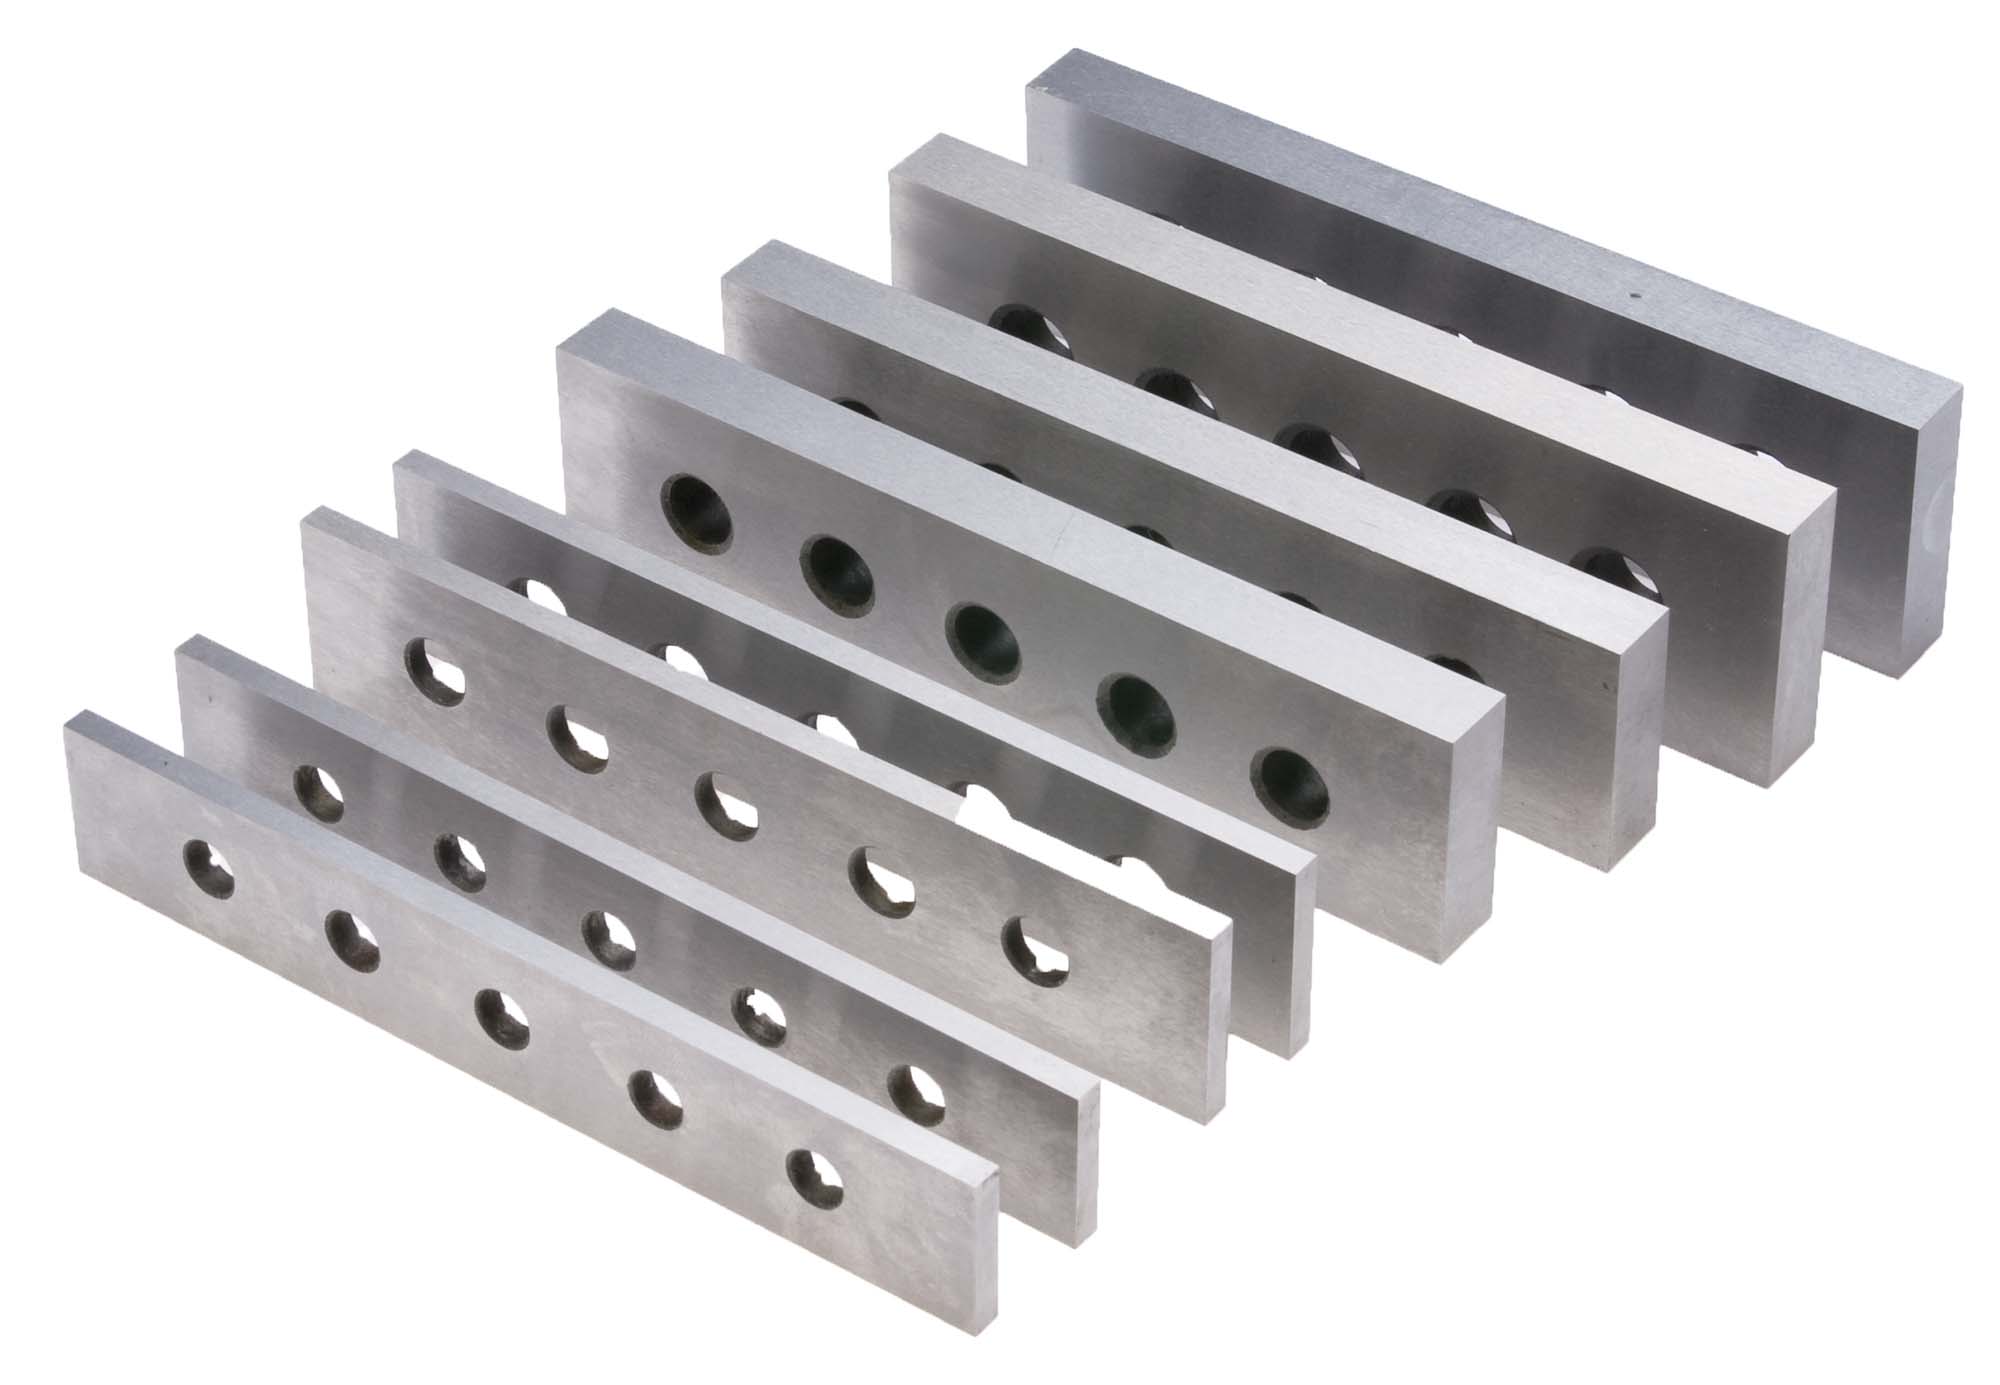 3/16" and 1/2" Steel Parallel Set - 4 Pair